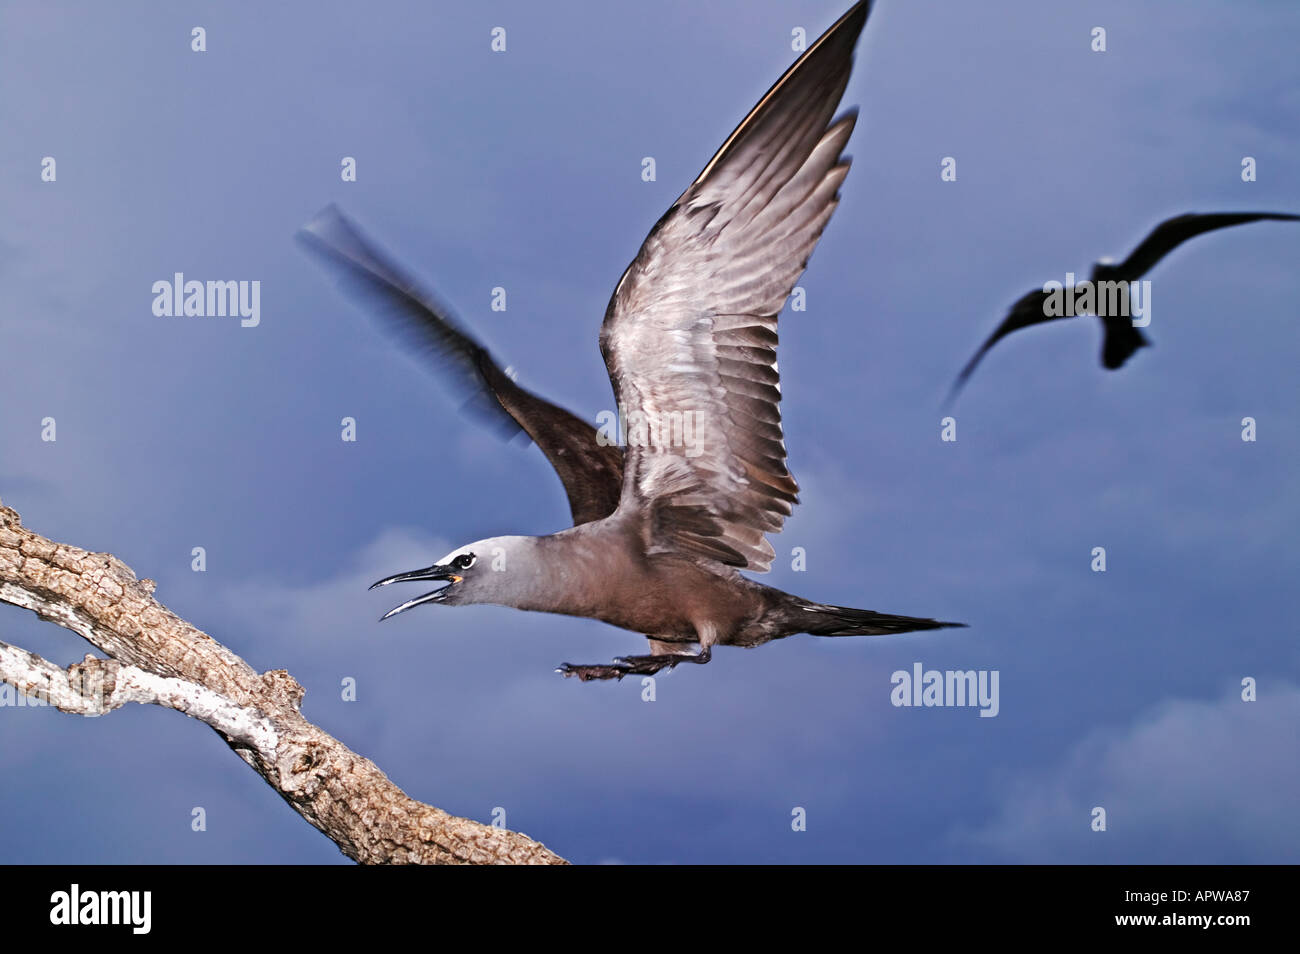 Common noddy tern Anous stolidus Coming into land at nesting site Seychelles Dist Tropical islands and oceans worldwide Stock Photo